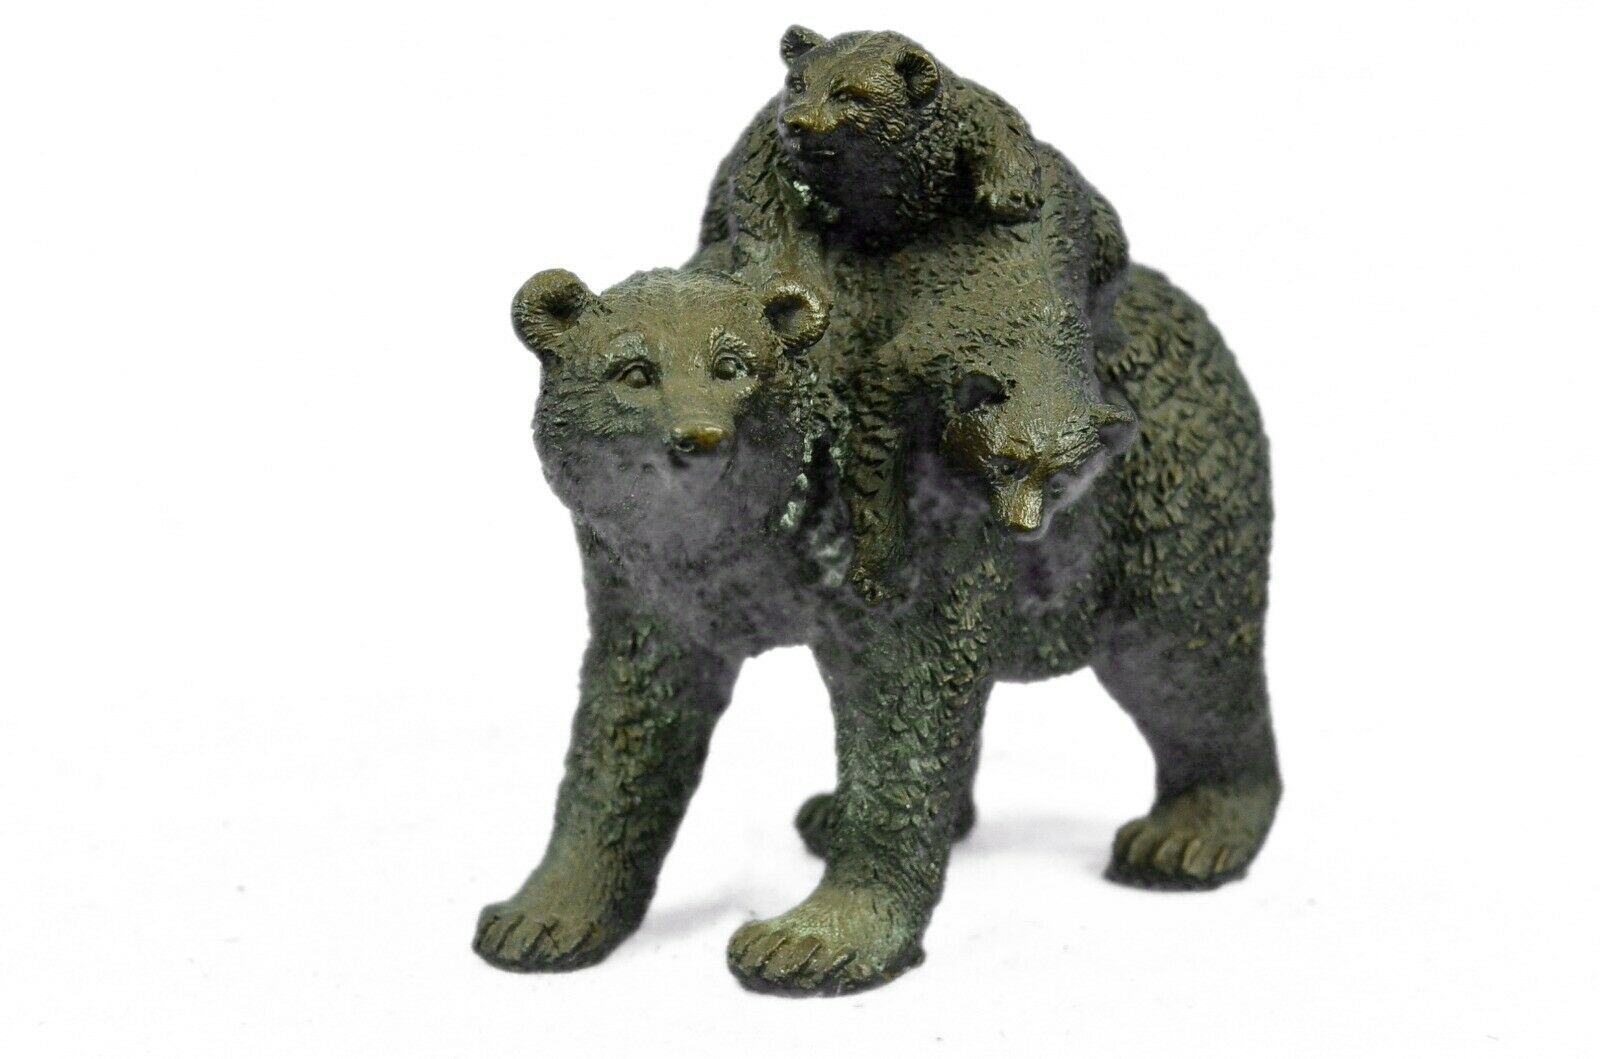 Two Young Cubs on back Mother Bear Bronze Sculpture Statue Figurine Art Deco NR